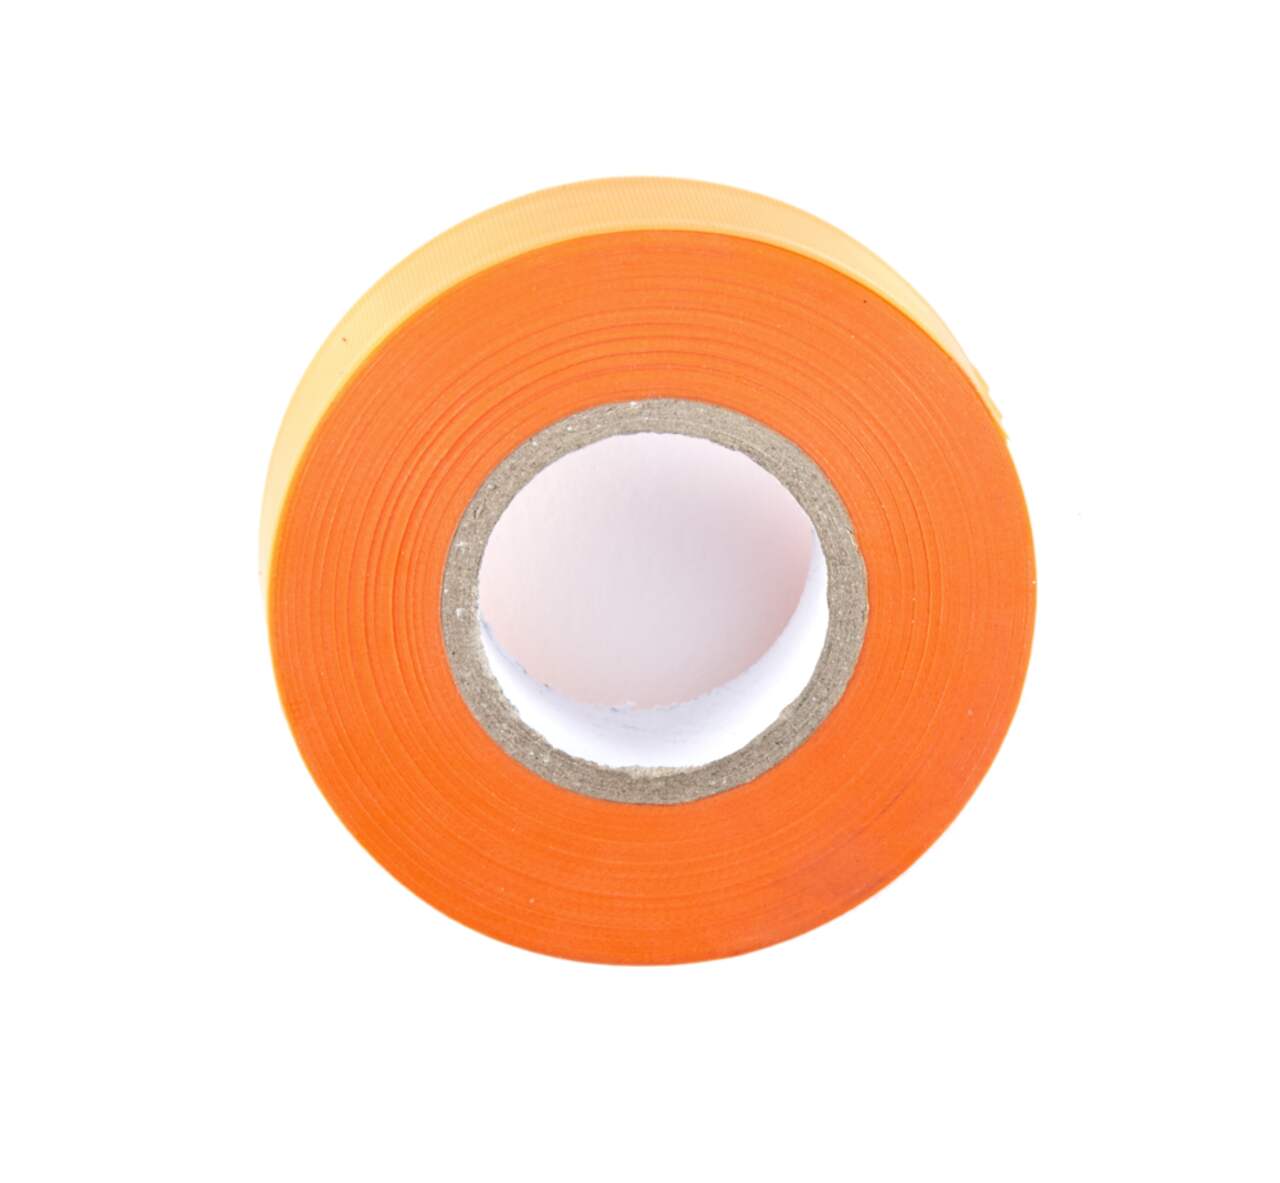 https://media-www.canadiantire.ca/product/playing/camping/camping-accessories/0765789/outbound-trail-tape-9754df09-31c5-4e34-b748-9a860ad53928.png?imdensity=1&imwidth=640&impolicy=mZoom